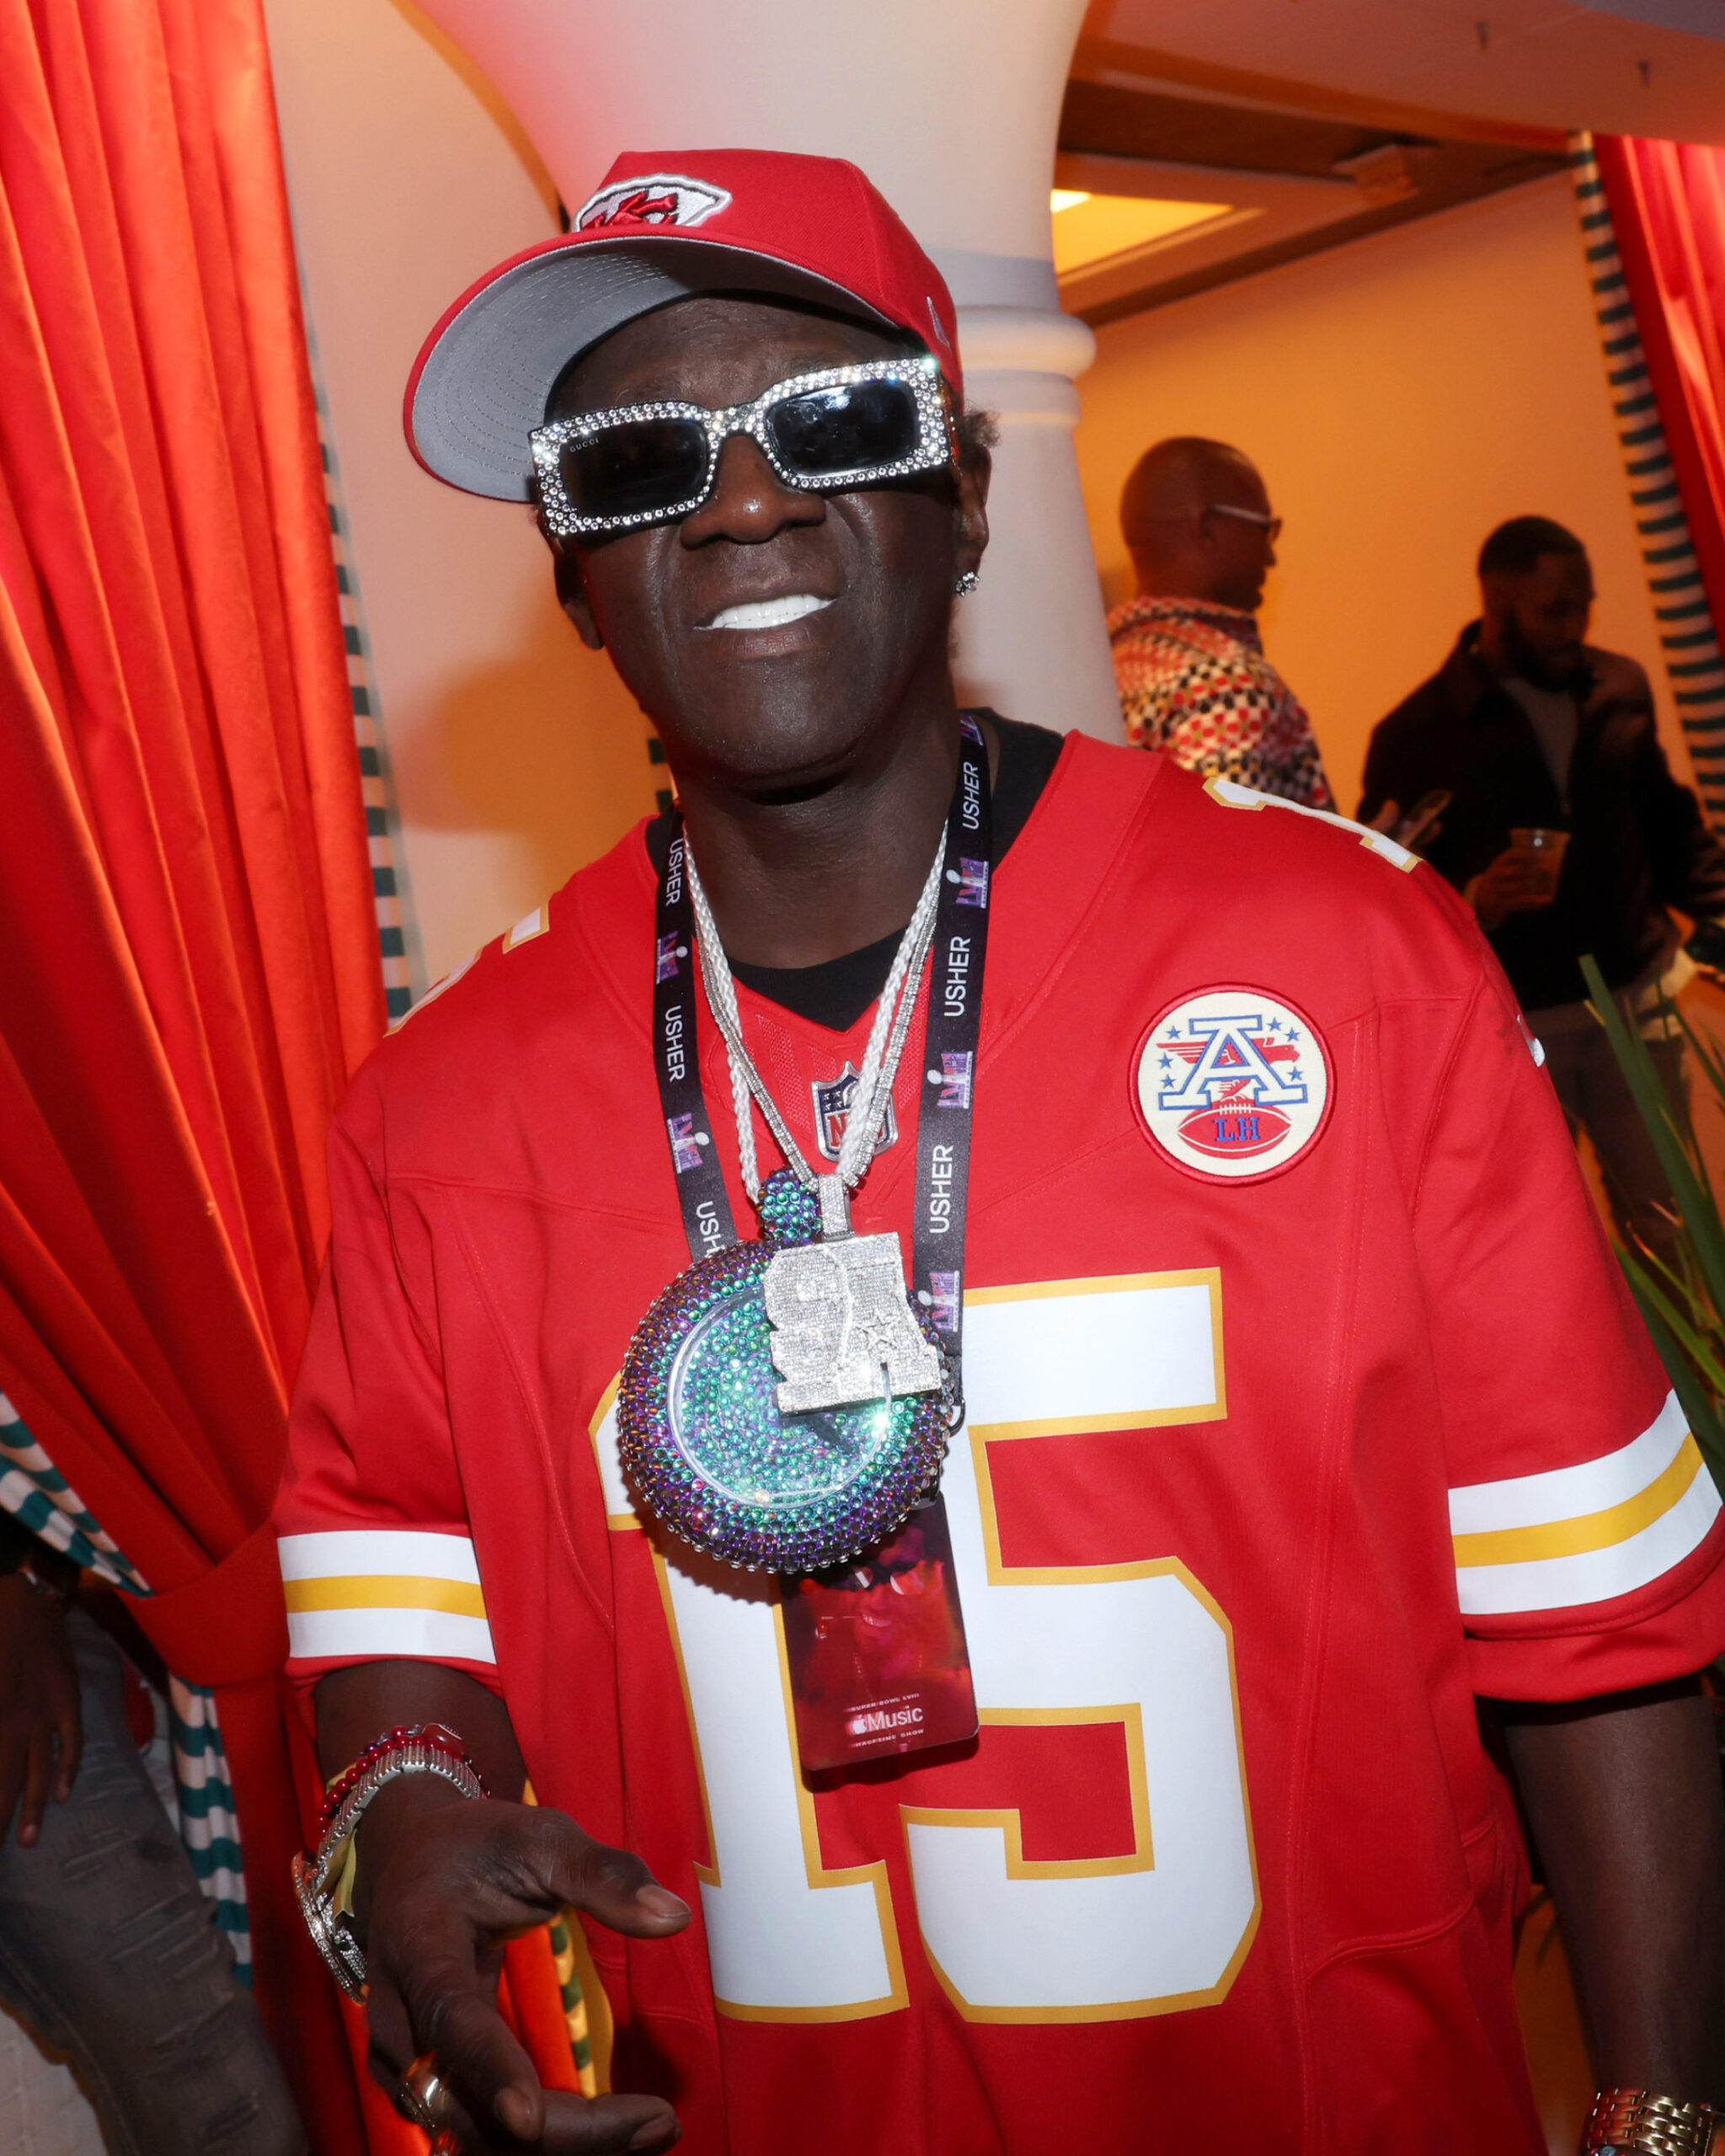 Flavor Flav at Flipper's Boogie Palace in Las Vegas. Photo credit: Rich Polk/Getty Images for Flipper's Roller Boogie Palace